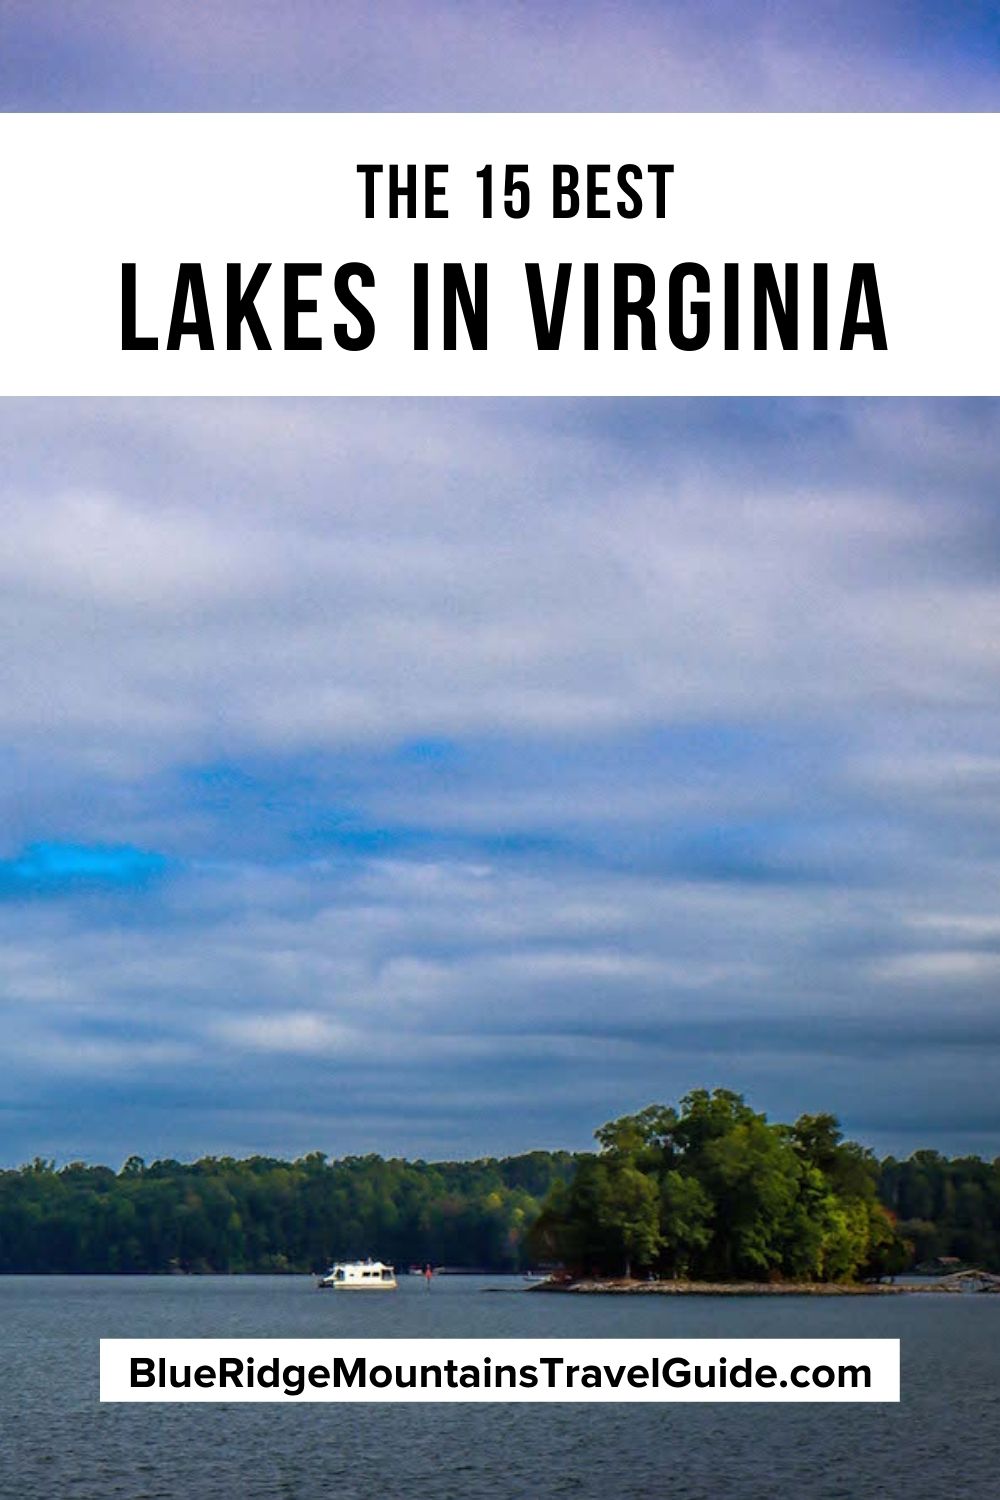 The 15 Best Lakes in the Virginia Mountains to Visit including info, facilities and the best things to do at each lake. | best lakes in virginia | lakes in virginia | lakes in va | VA lakes | lakes of virginia | natural lakes in virginia | natural lakes in va | lakes in northern virginia | lakes in northern va | virginia lakes | largest lake in va | largest lake in virginia | bodies of water in virginia | virginia lake | lake communities in virginia | mountain lake virginia |